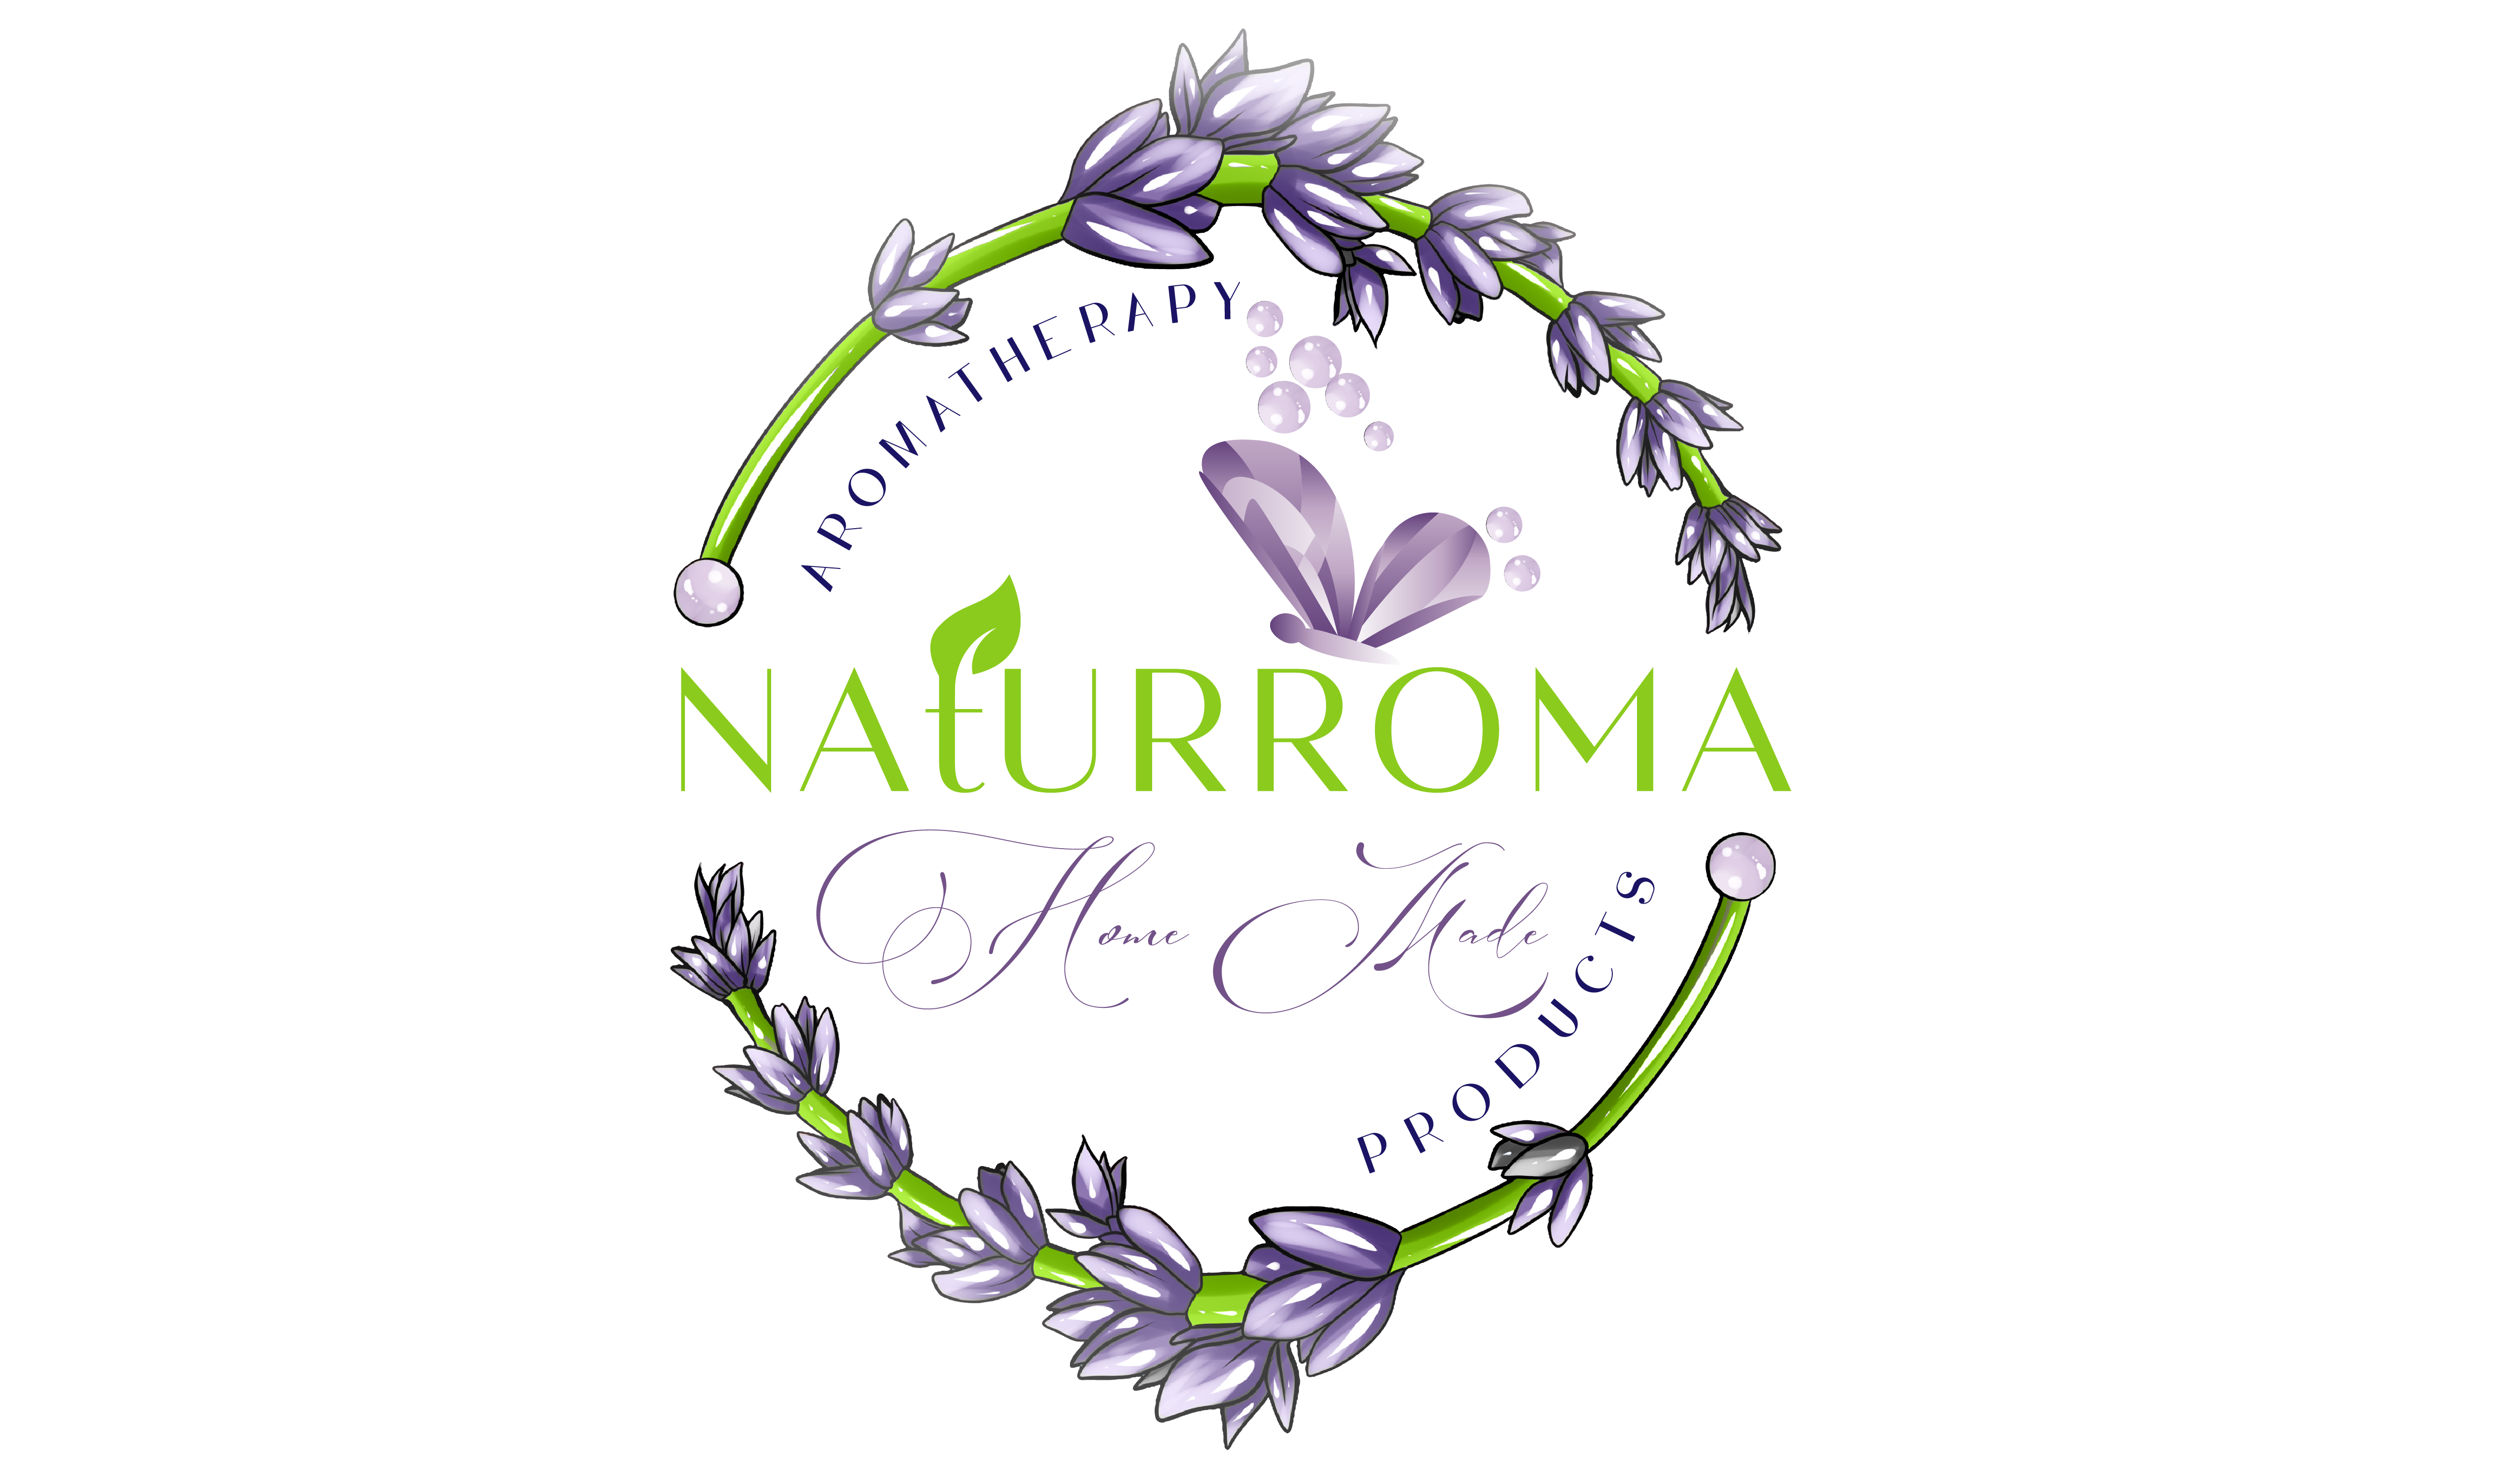 Naturroma Hand Made products